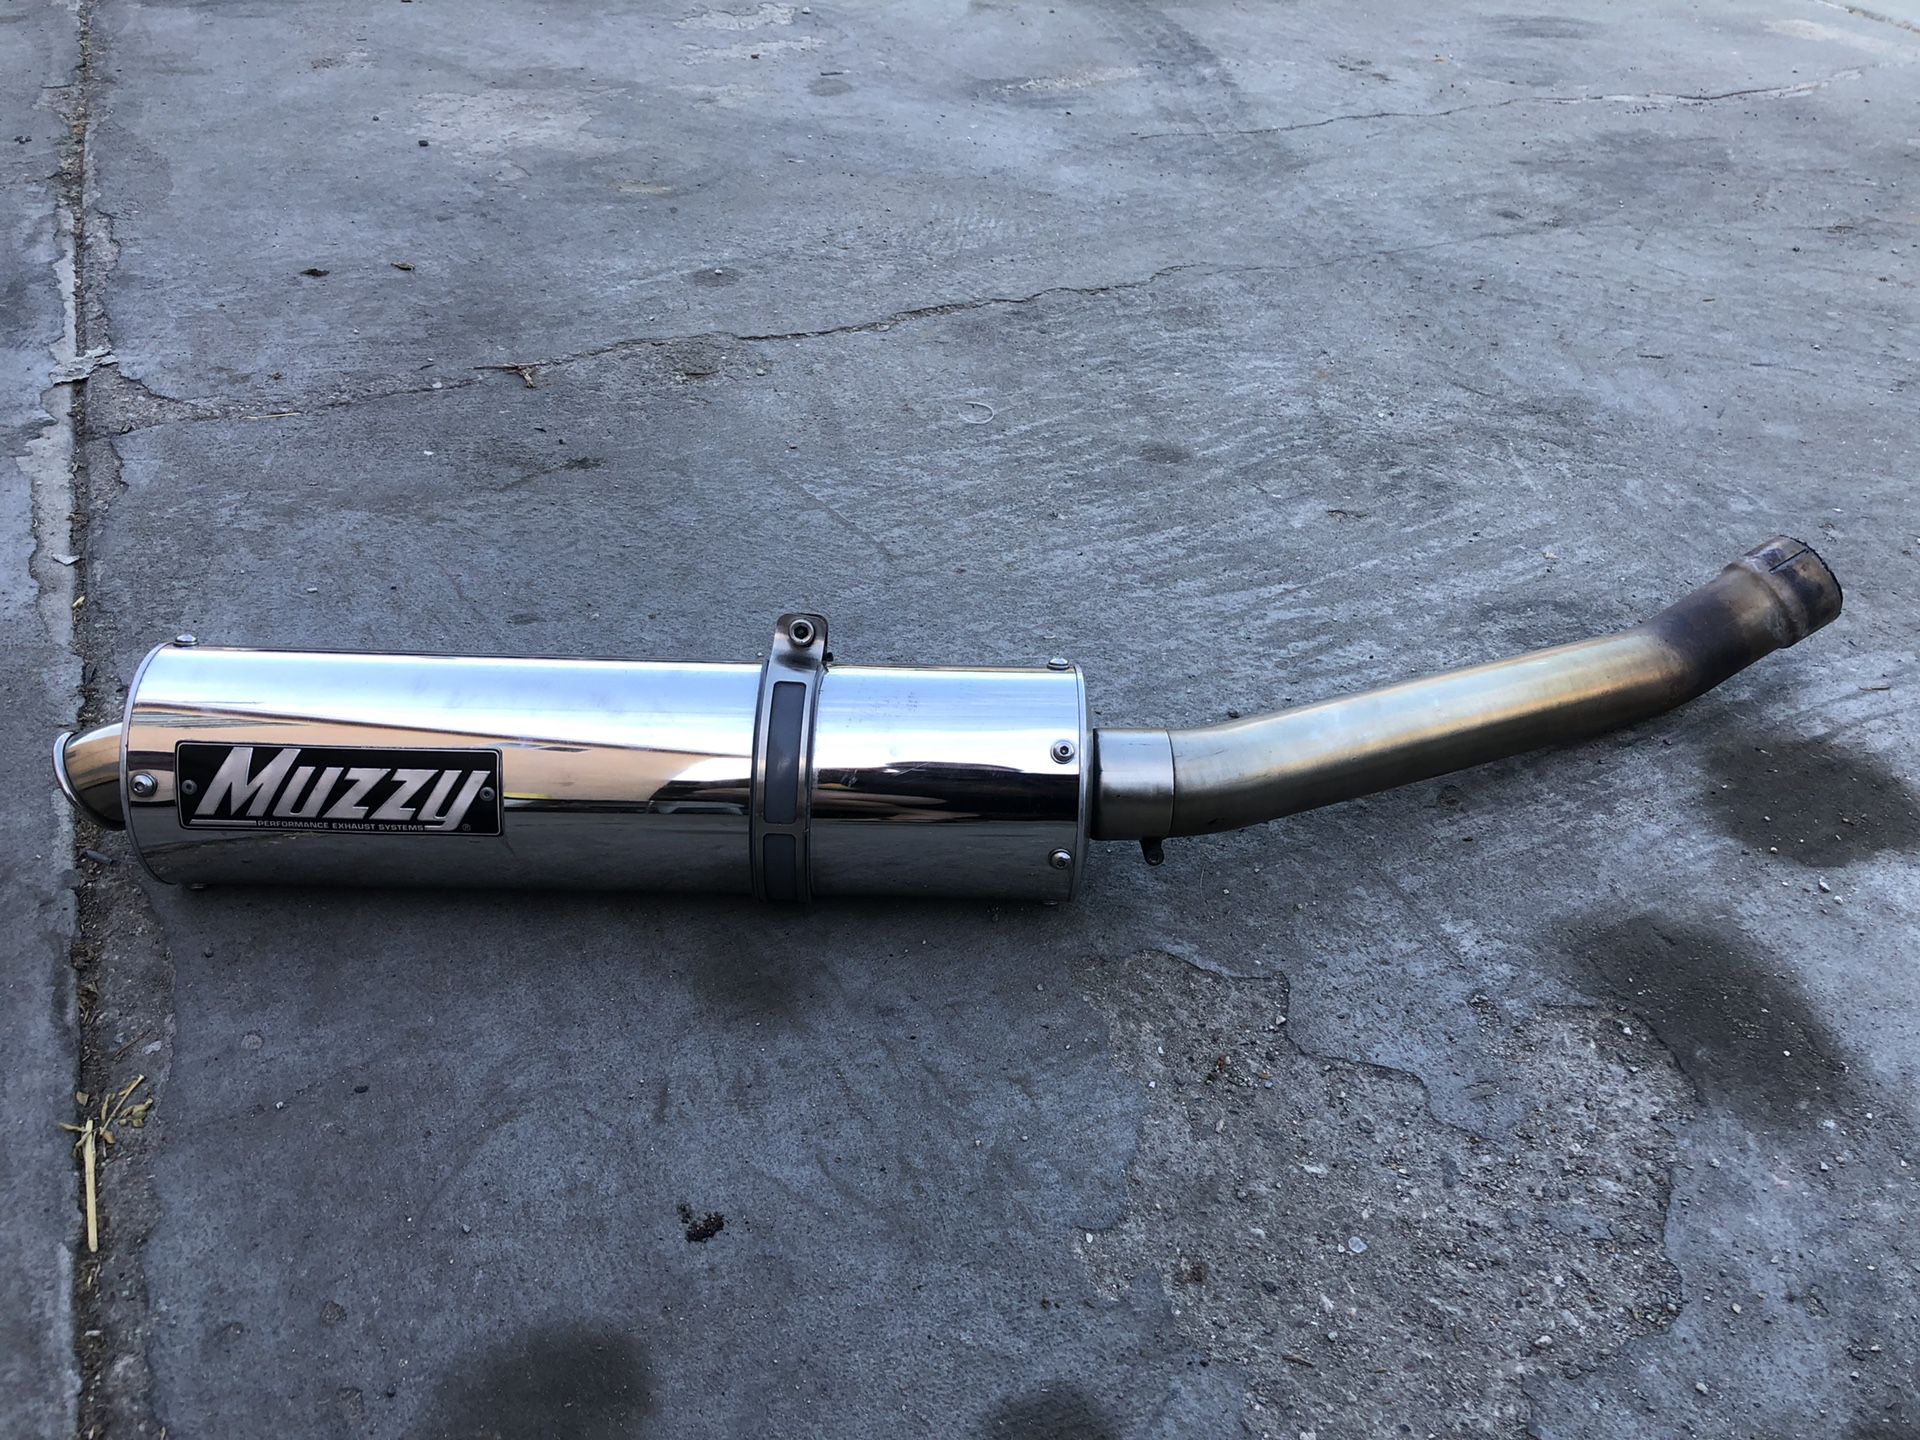 Muzzy motorcycle exhaust! Was on a 2003 Kawasaki ZX9R.